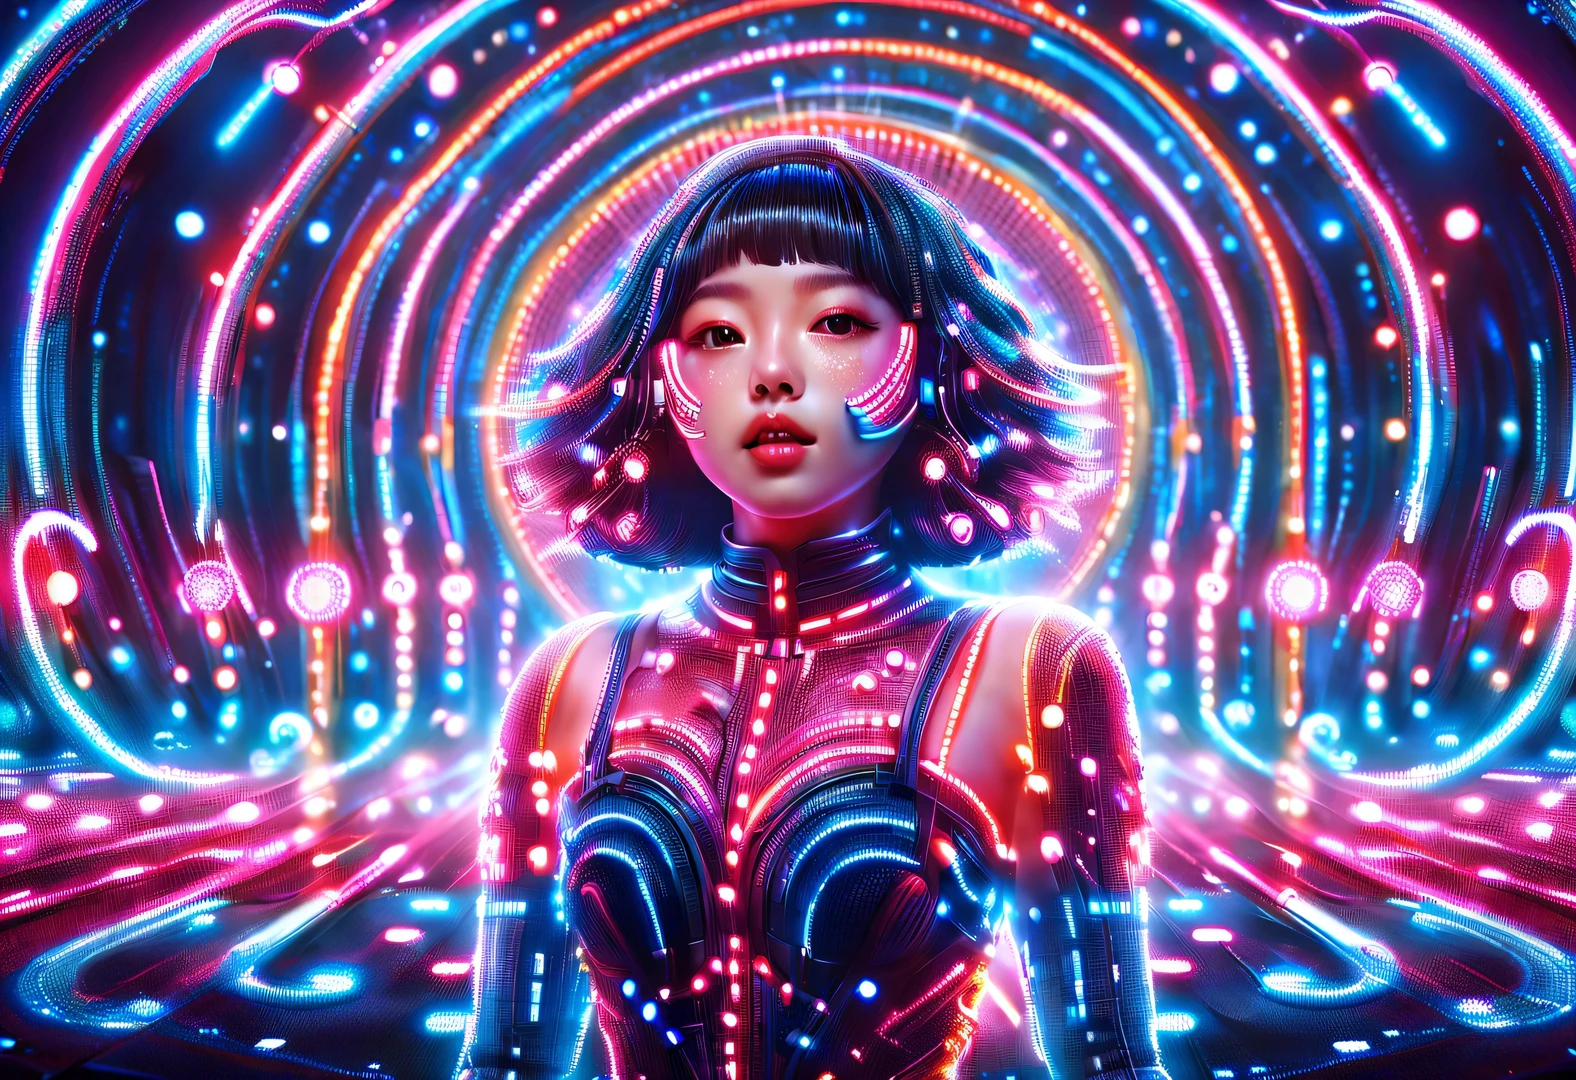 vaporwave style,Beautiful detailed,Vector illustration, Minimalism, digital illustration, Vector illustration，Minimalism，digital illustration，dramatic lighting，Art exhibition trends，Award-winning，icon，Very detailed
(The cute and lively Korean girl 18-year-old Shim Eun-kyung sang happily in front of the super huge LED screen.），（holding a microphone），Jumping pose，dynamic action，inspired by《strange her》，Shen Eun-kyung combed her hair into a slightly curly baby style，Very fair skin，There are two charming dimples on both cheeks，Wearing a lace dress，background：LED screen, dramatic lighting, 

